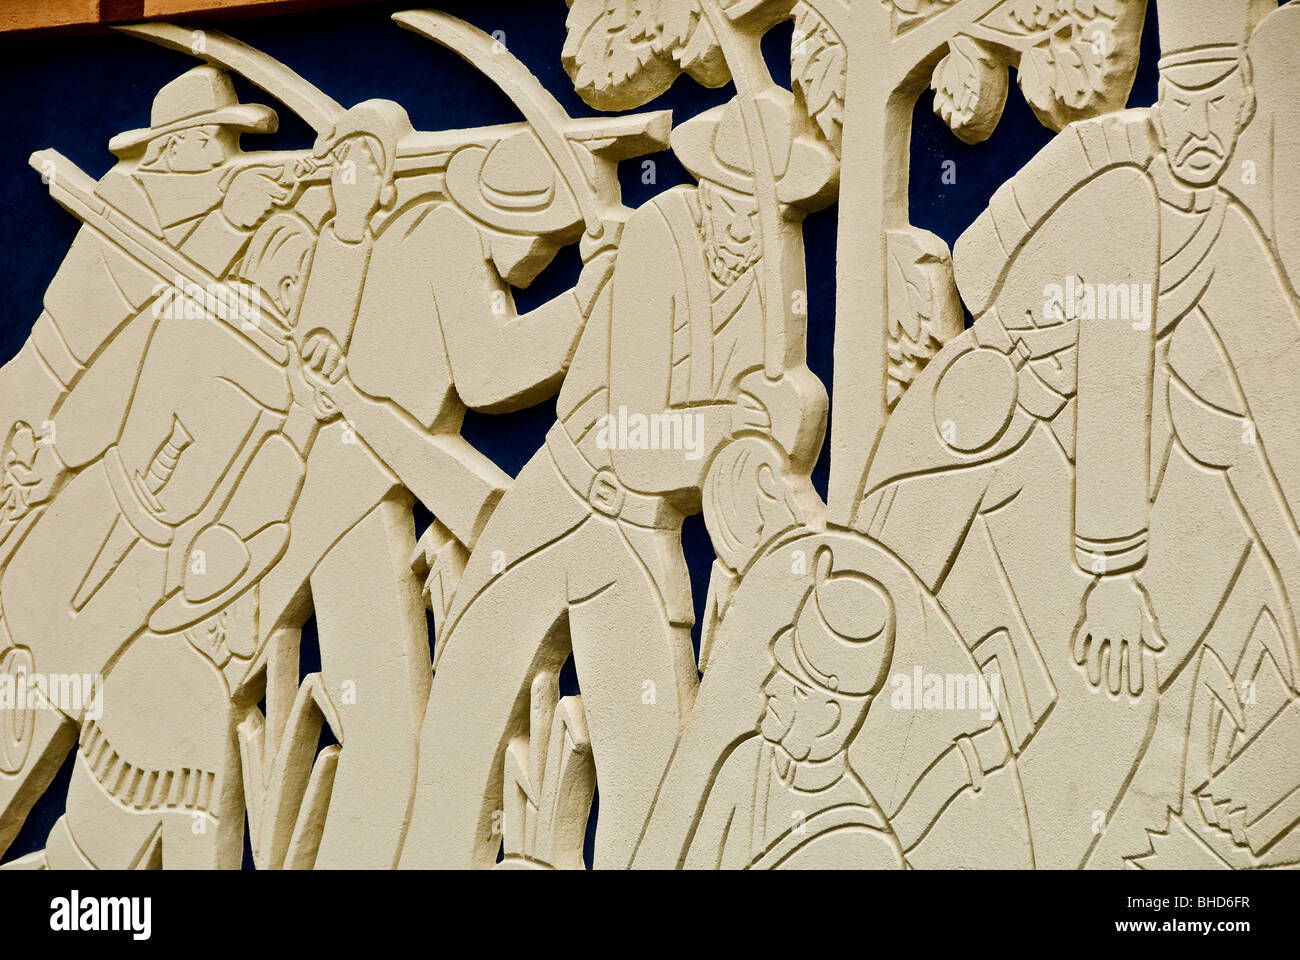 Bas-relief frieze with figures of early pioneers, explorers and soldiers of Texas on Tower Building in Fair Park, Dallas, Texas Stock Photo